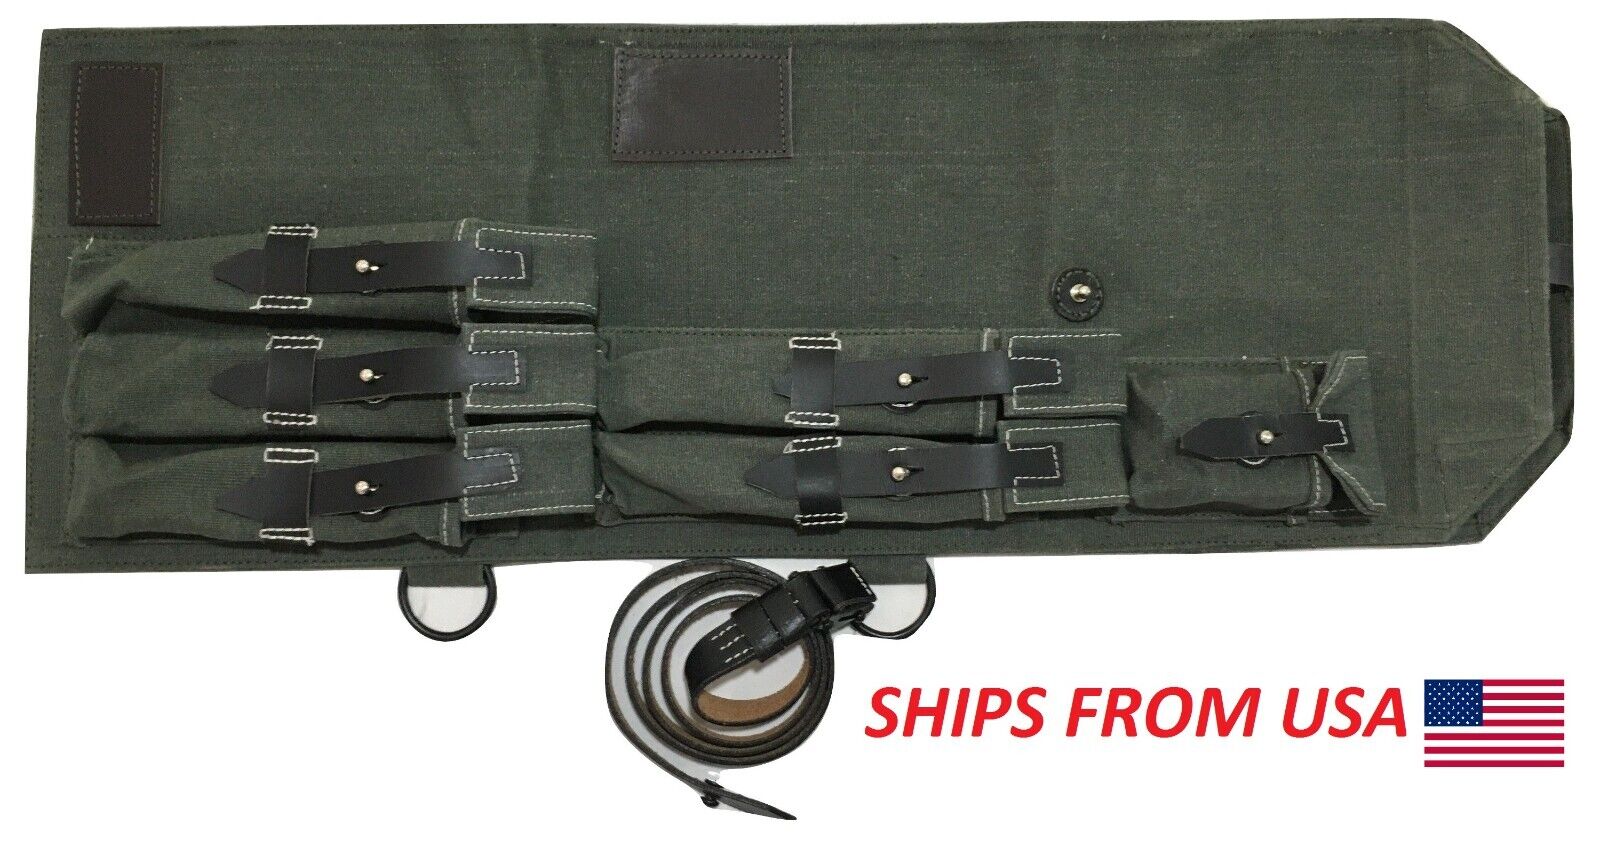 WWII GERMAN MP CANVAS CARRY CASE OD GREEN (GET FREE MP SLING)